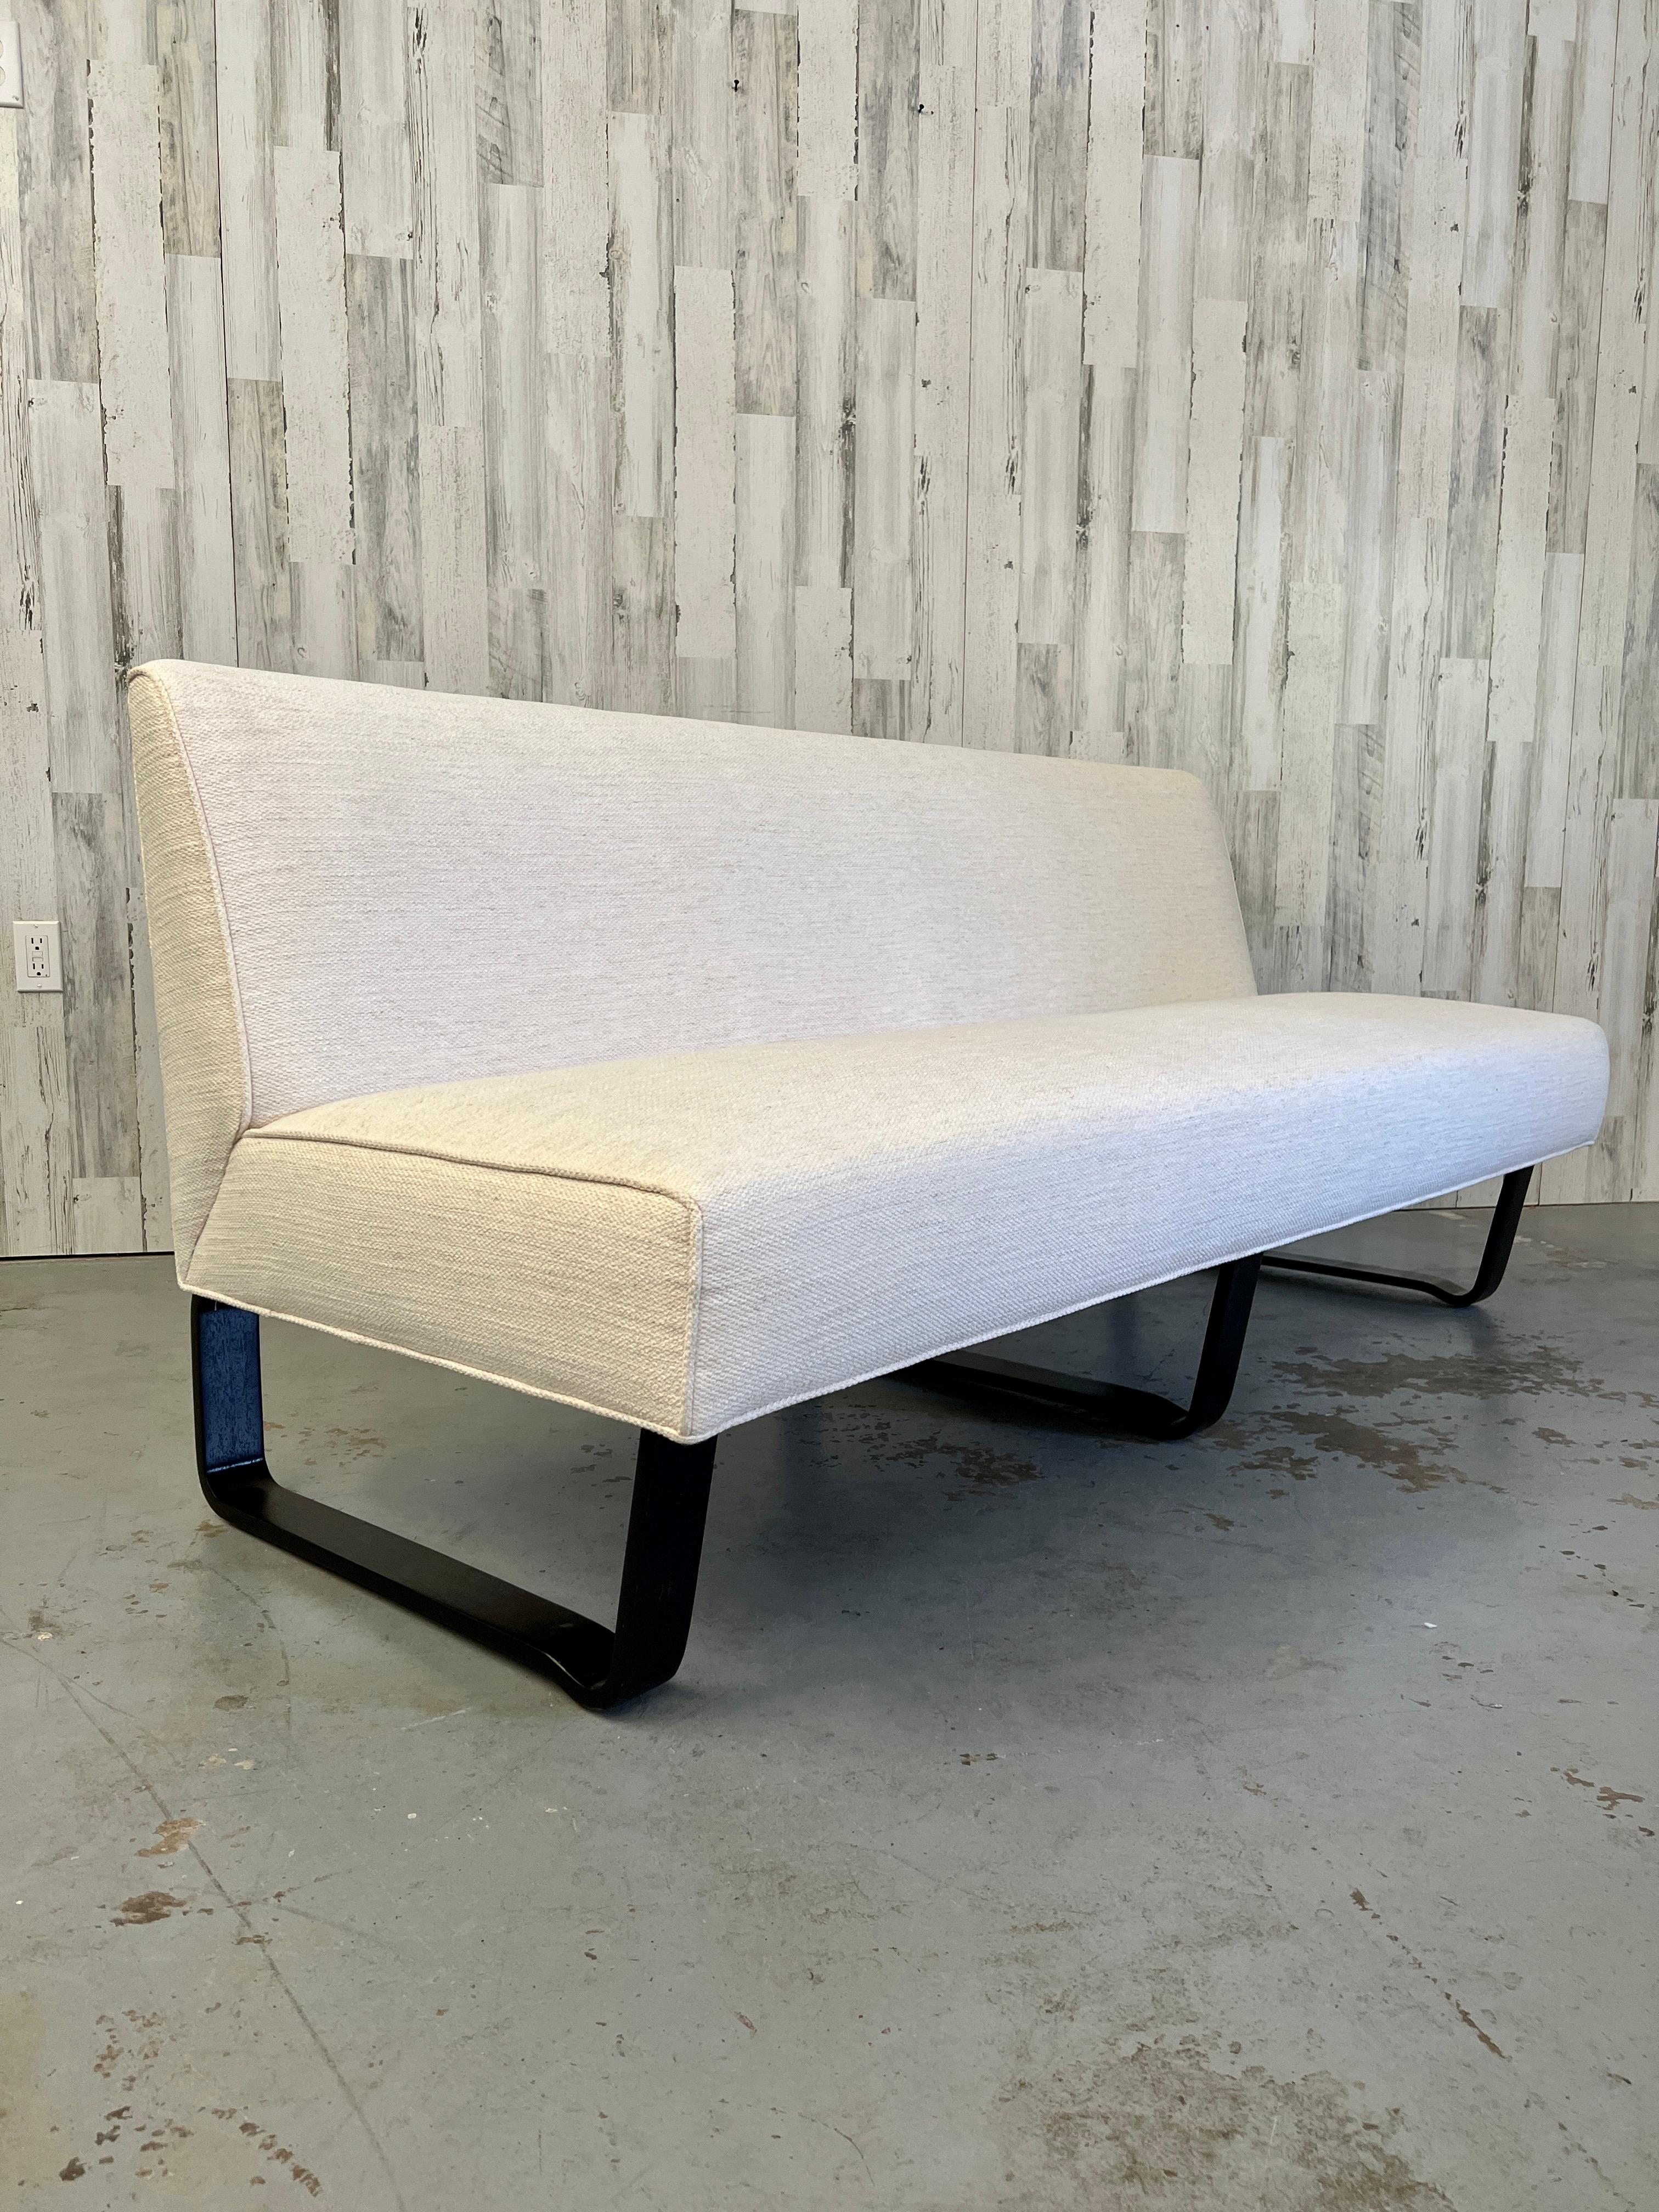 Edward Wormley slipper sofa for Dunbar with off white upholstery and ebonized bentwood legs.
Older restoration.